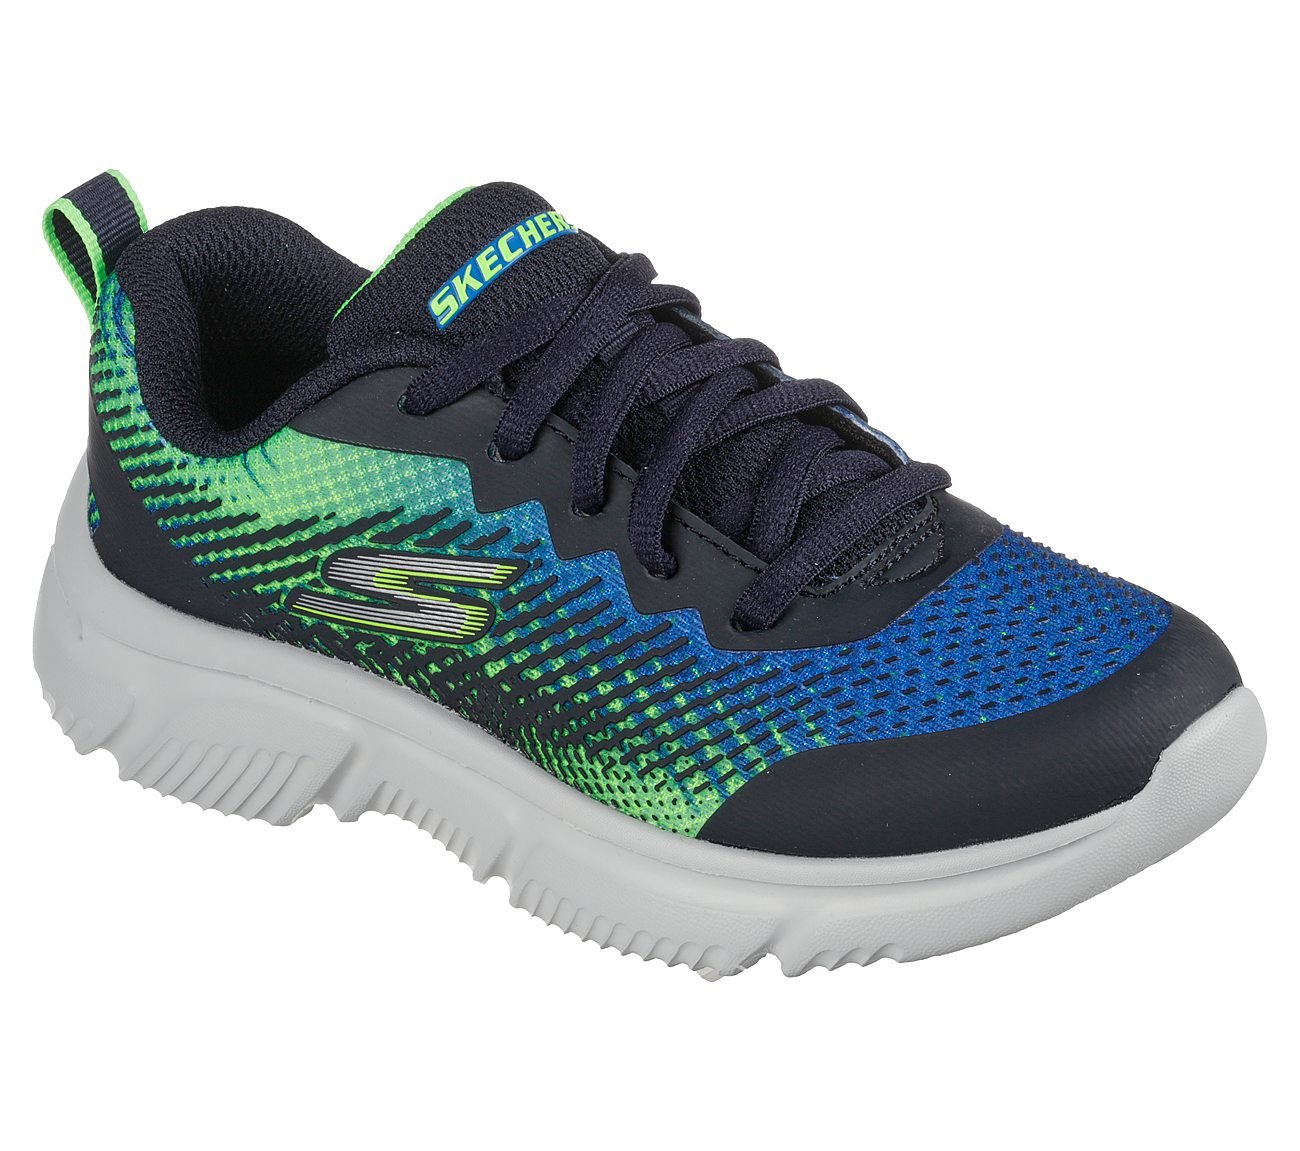 GO RUN 650, NAVY/LIME Footwear Lateral View